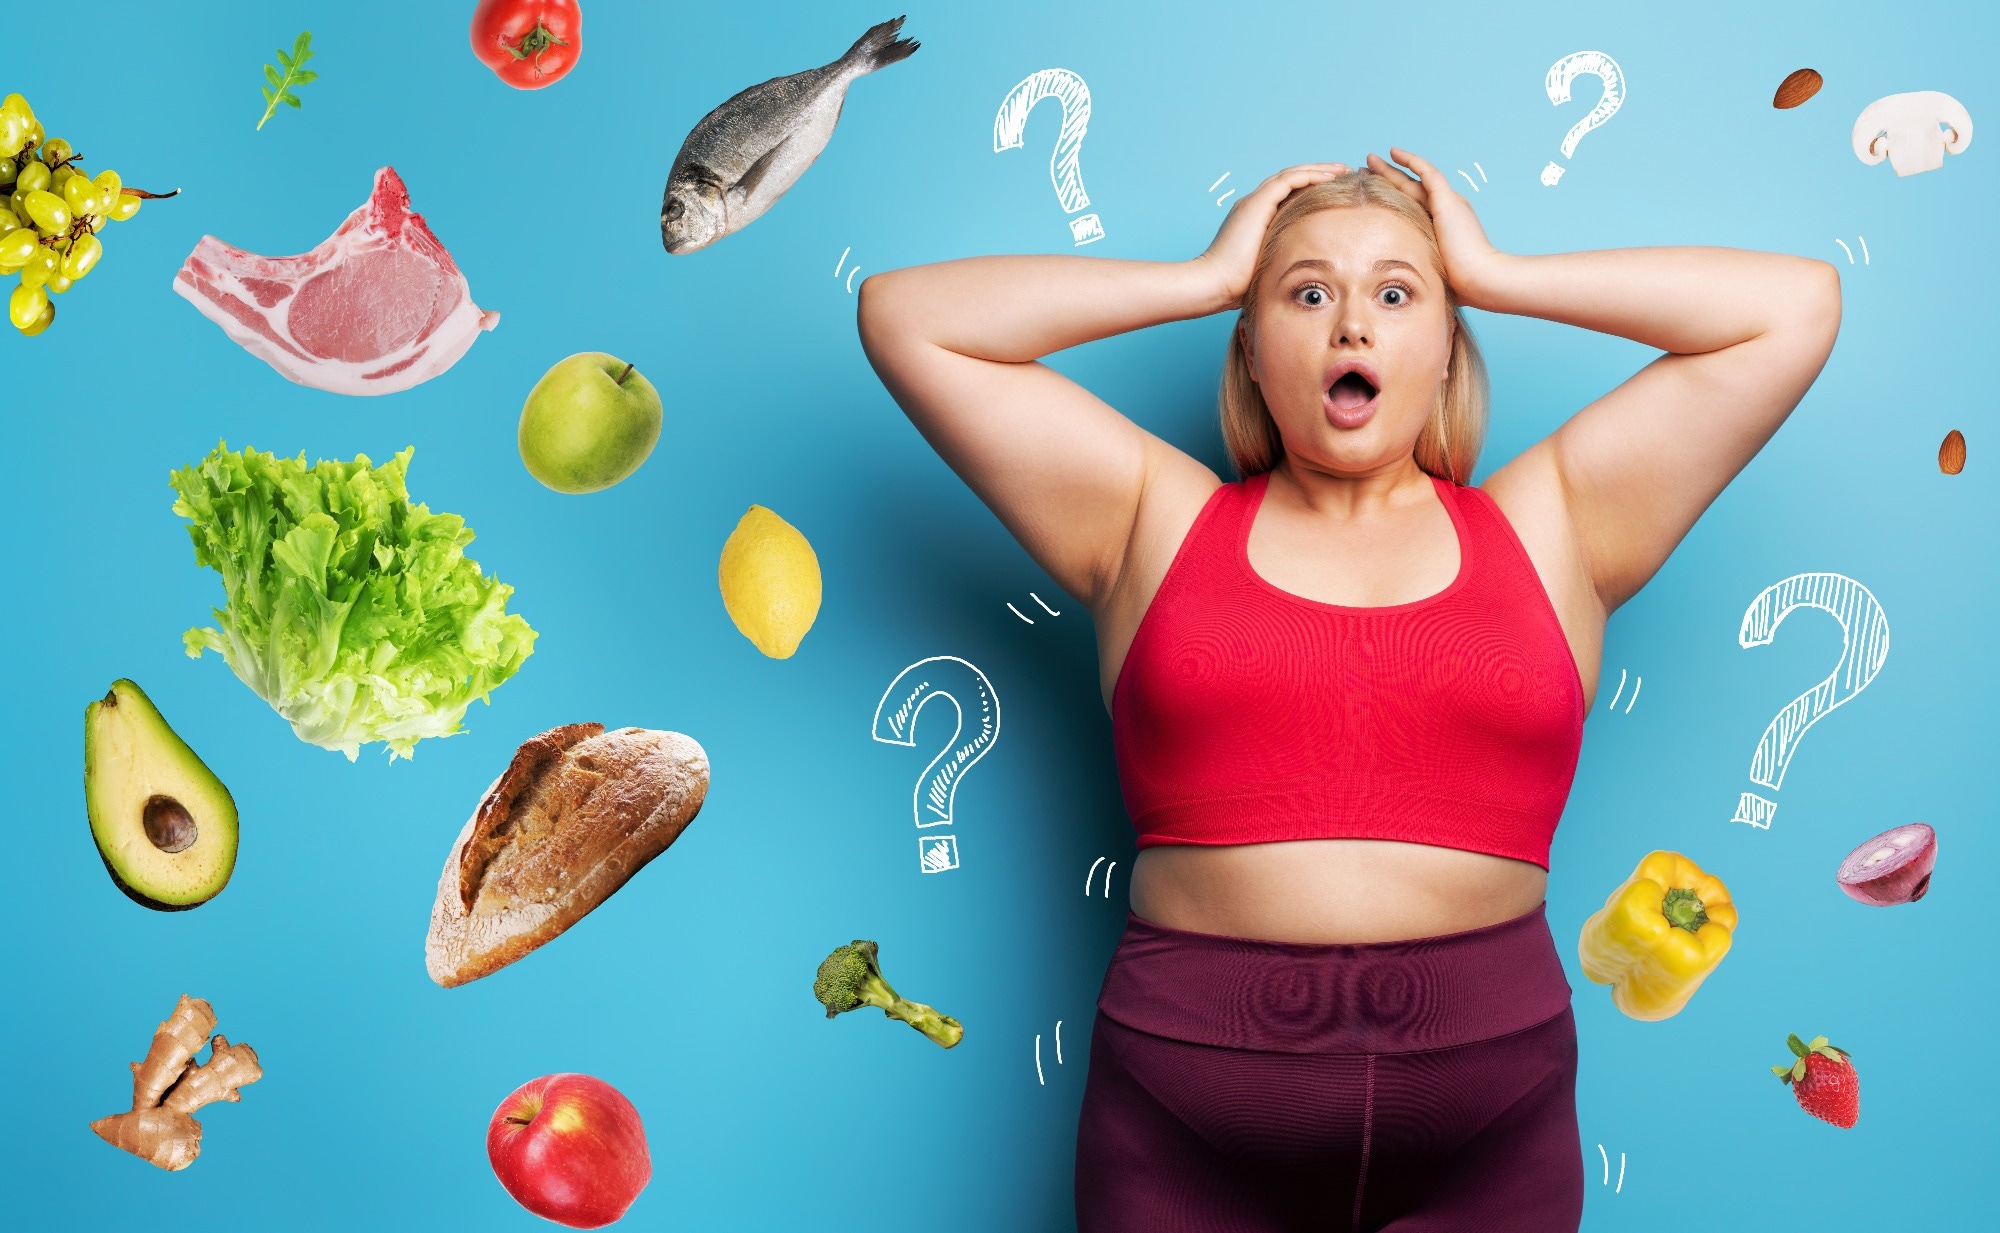 Study: Popular diets as selected by adults in the United States show wide variation in carbon footprints and diet quality. Image Credit: alphaspirit.it / Shutterstock